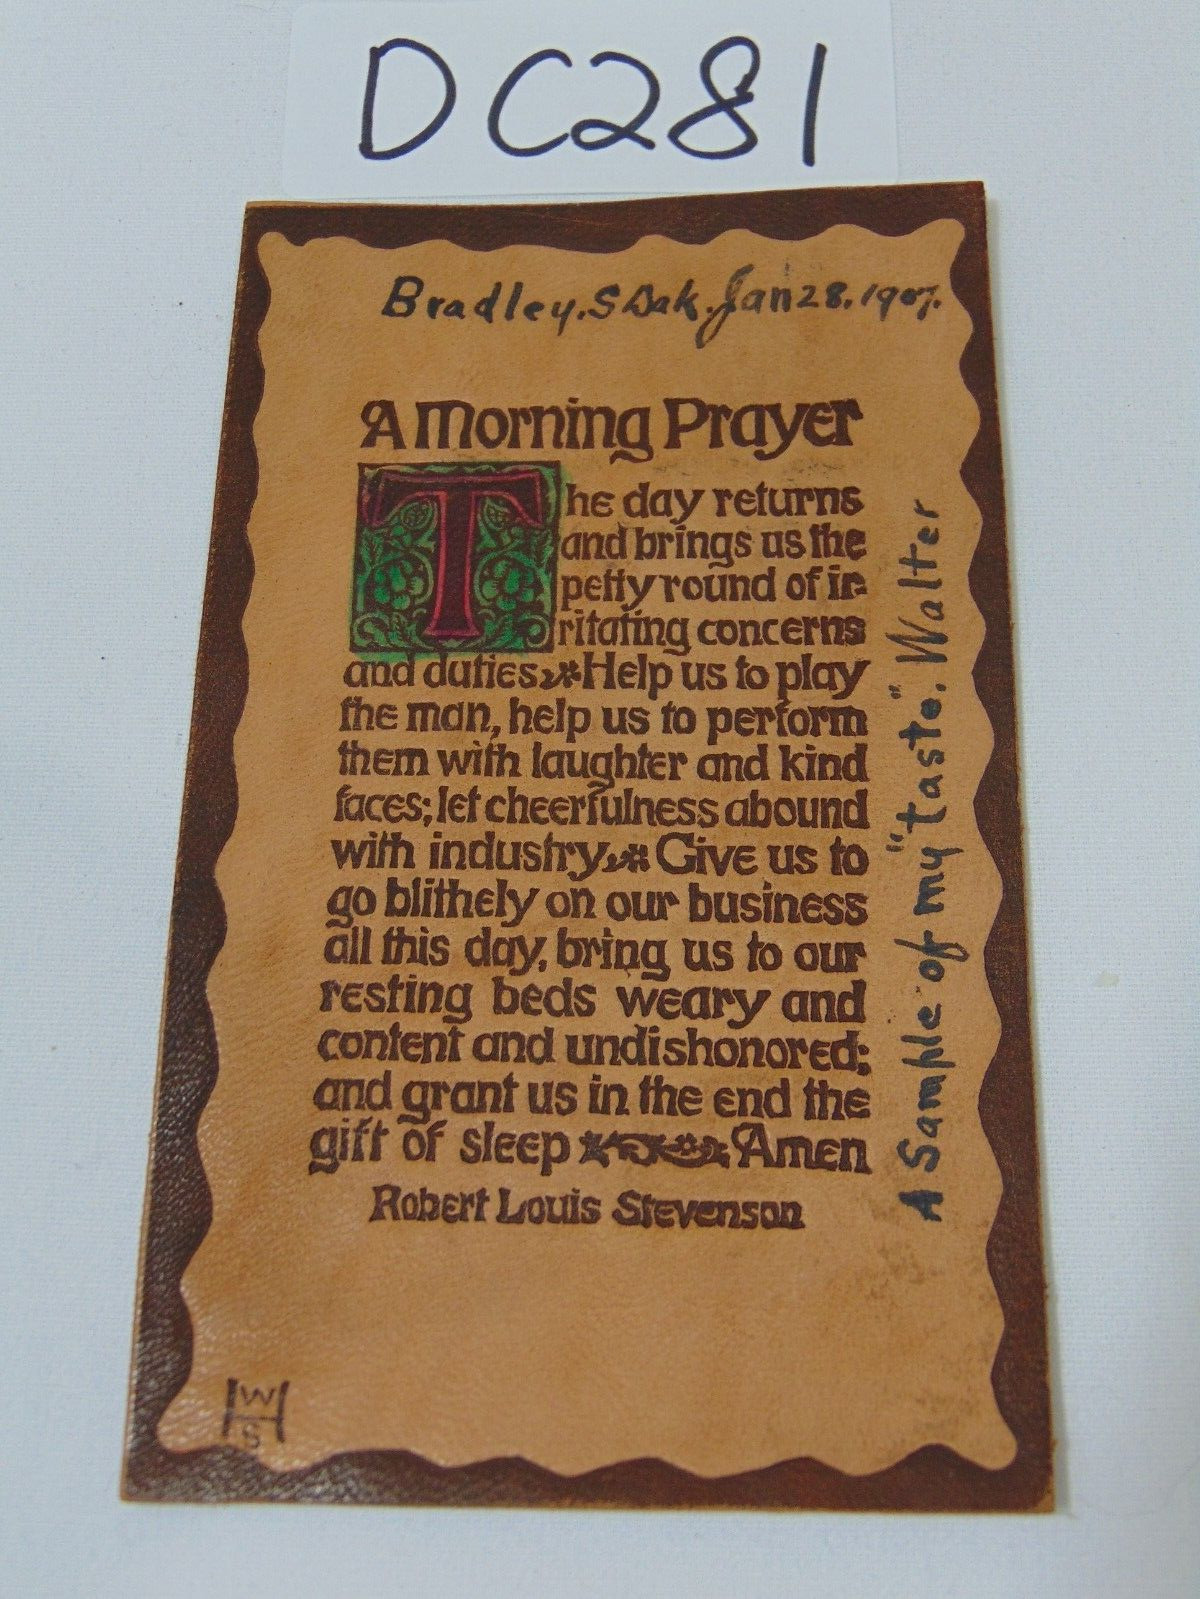 LEATHER POSTCARD C1907 A MORNING PRAYER ARTS AND CRAFTS HAND COLORED STEVENSON